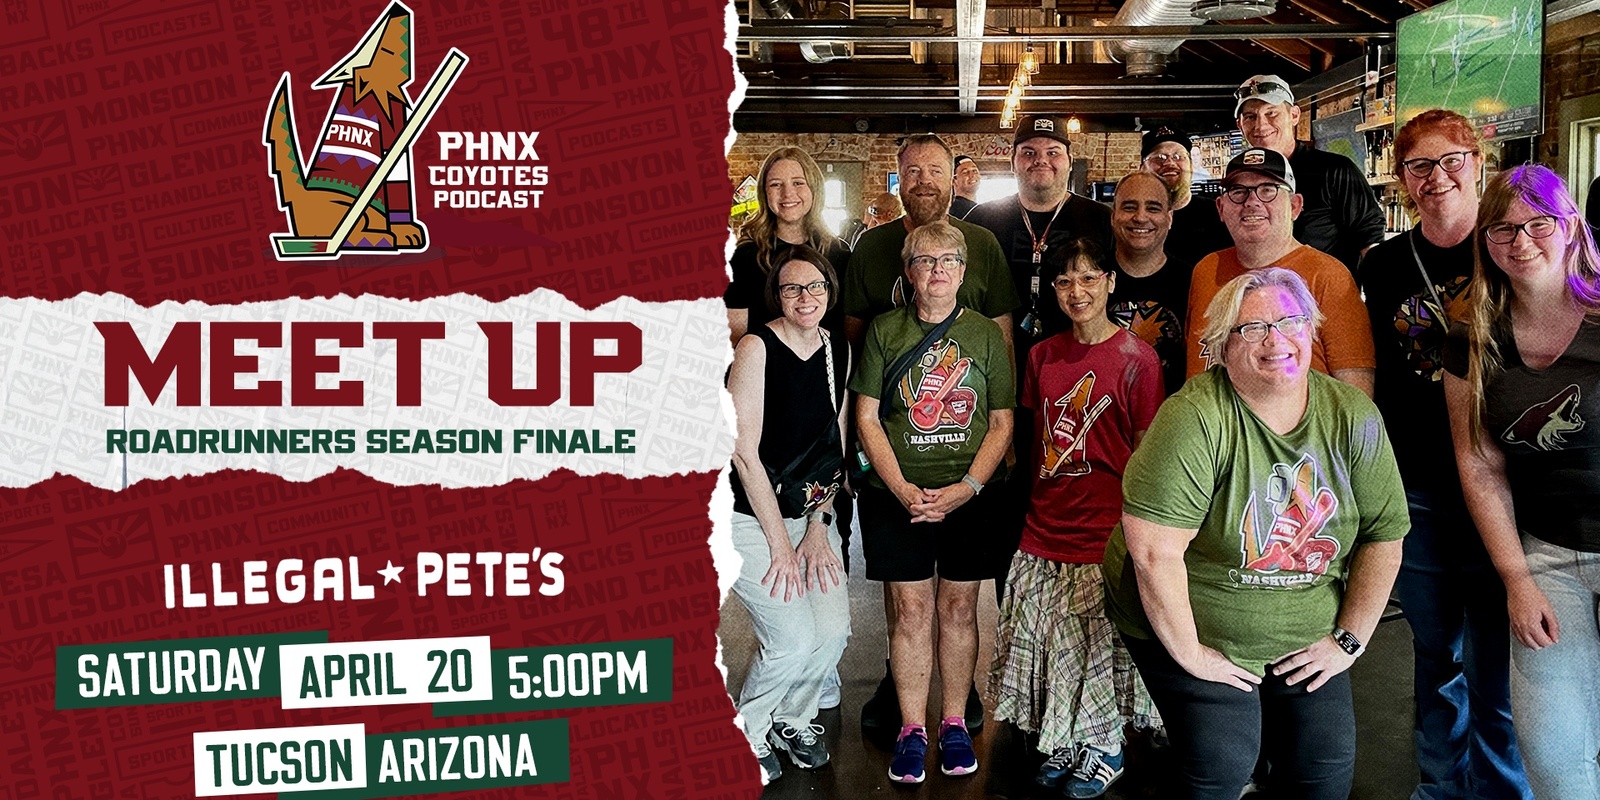 Banner image for PHNX Coyotes Meetup for the Roadrunners Season Finale in Tucson